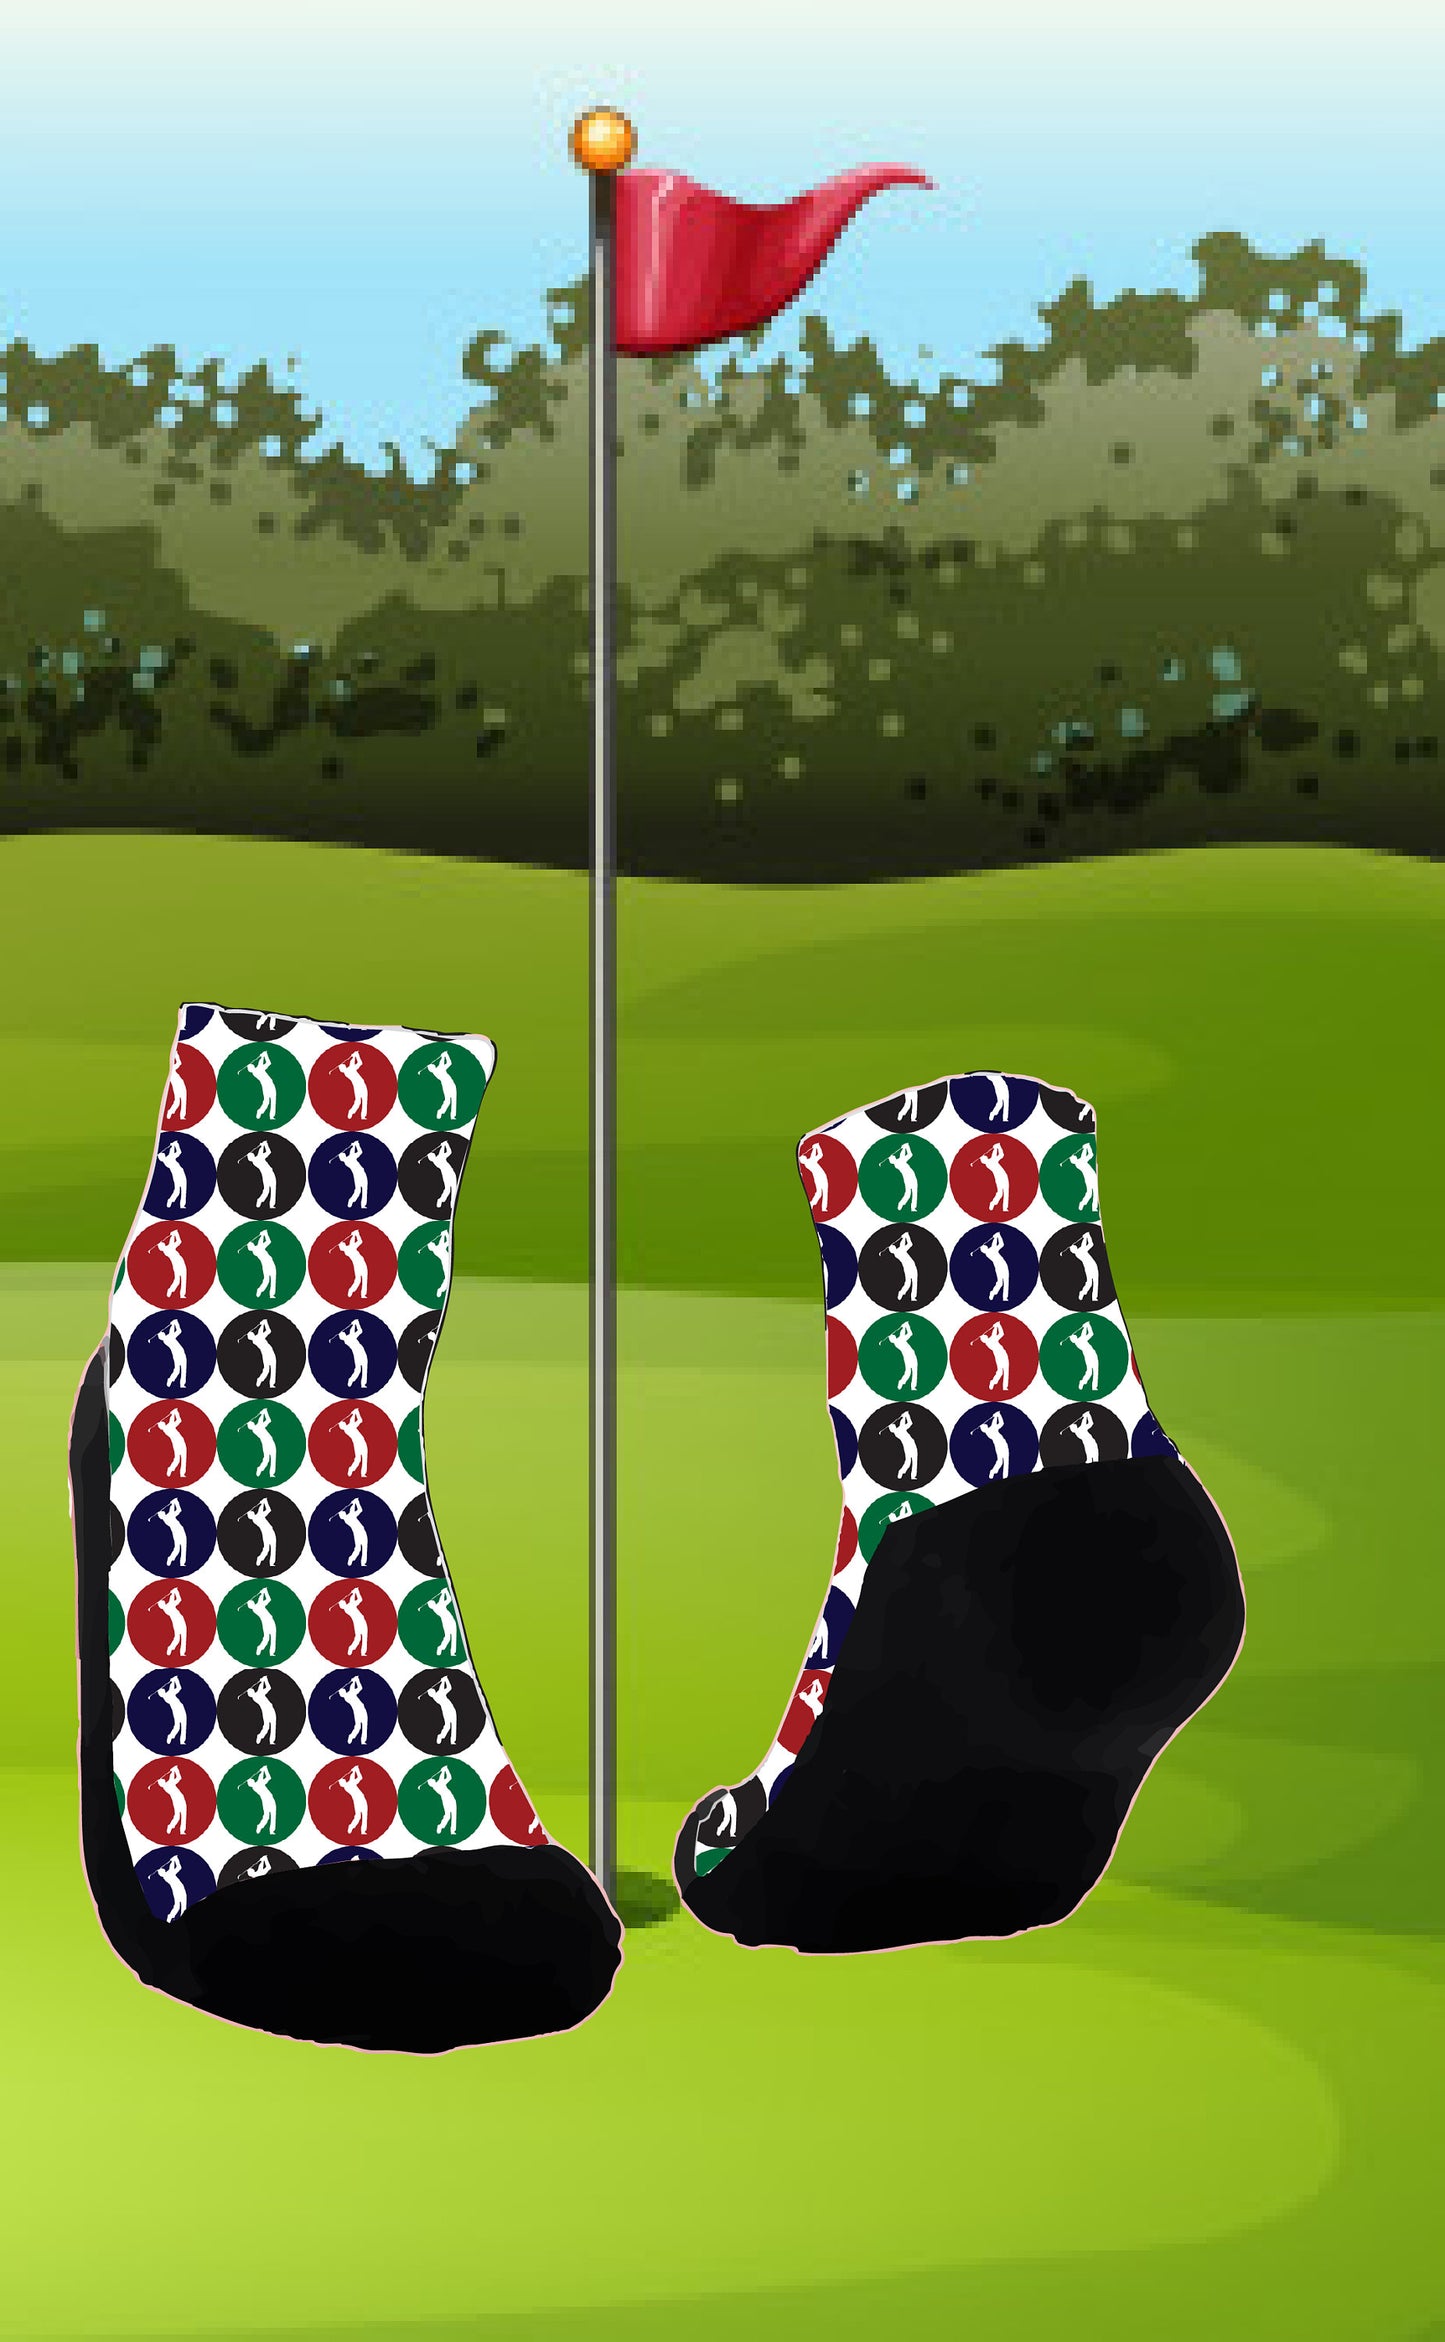 Golf Crazy Custom Socks, Can be personalized and created for you, customized socks perfect as a holiday gift or birthday gift. Athletic Crew